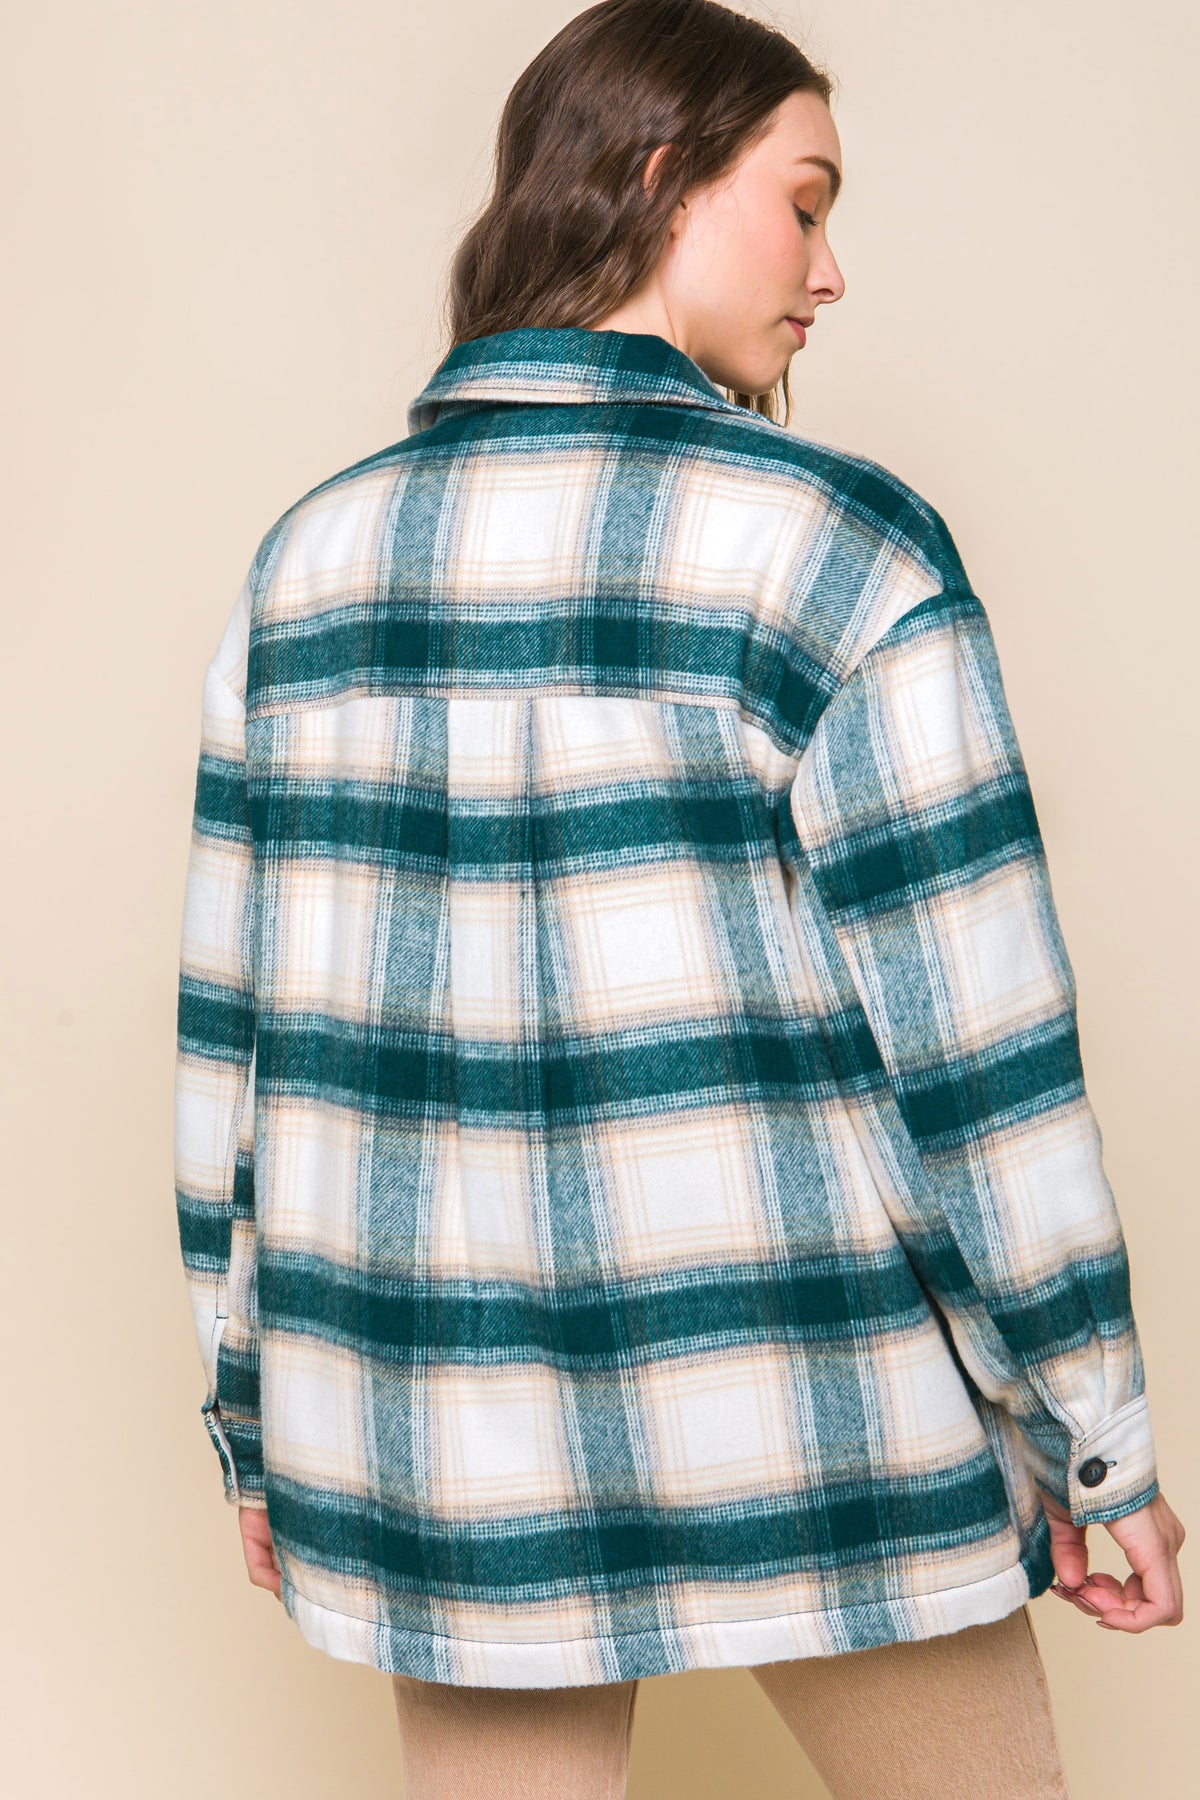 Love Tree Plaid button up shacket with Sherpa Lining